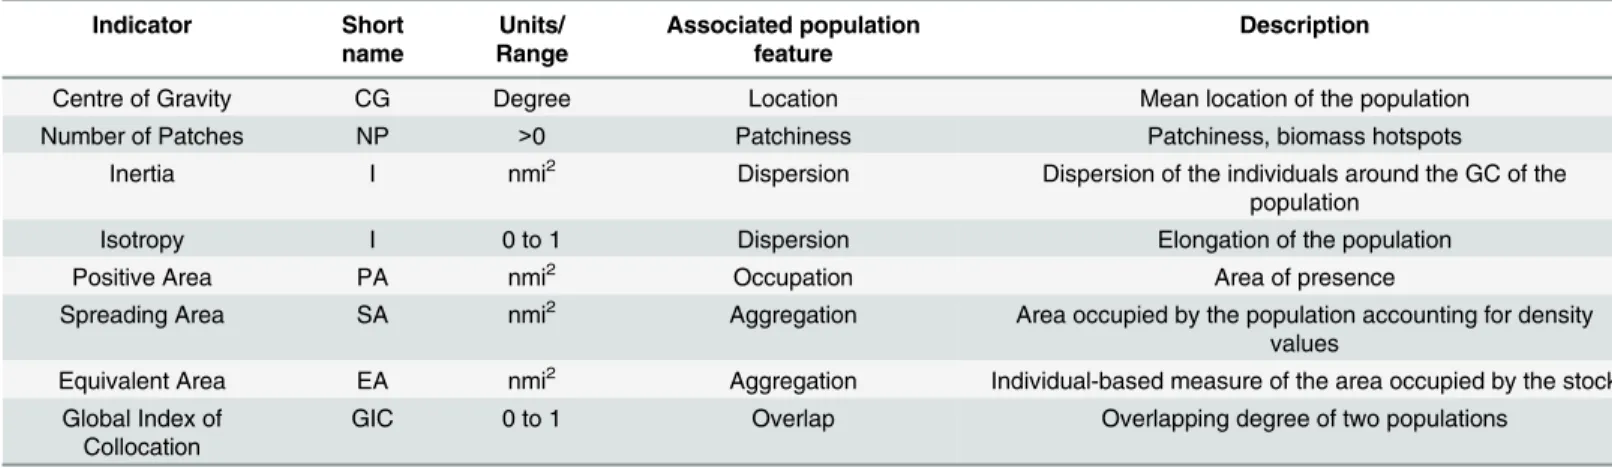 Table 1. Summary of the spatial indices (based on [3]) used to characterize the spatial pattern of anchovy and sardine populations.